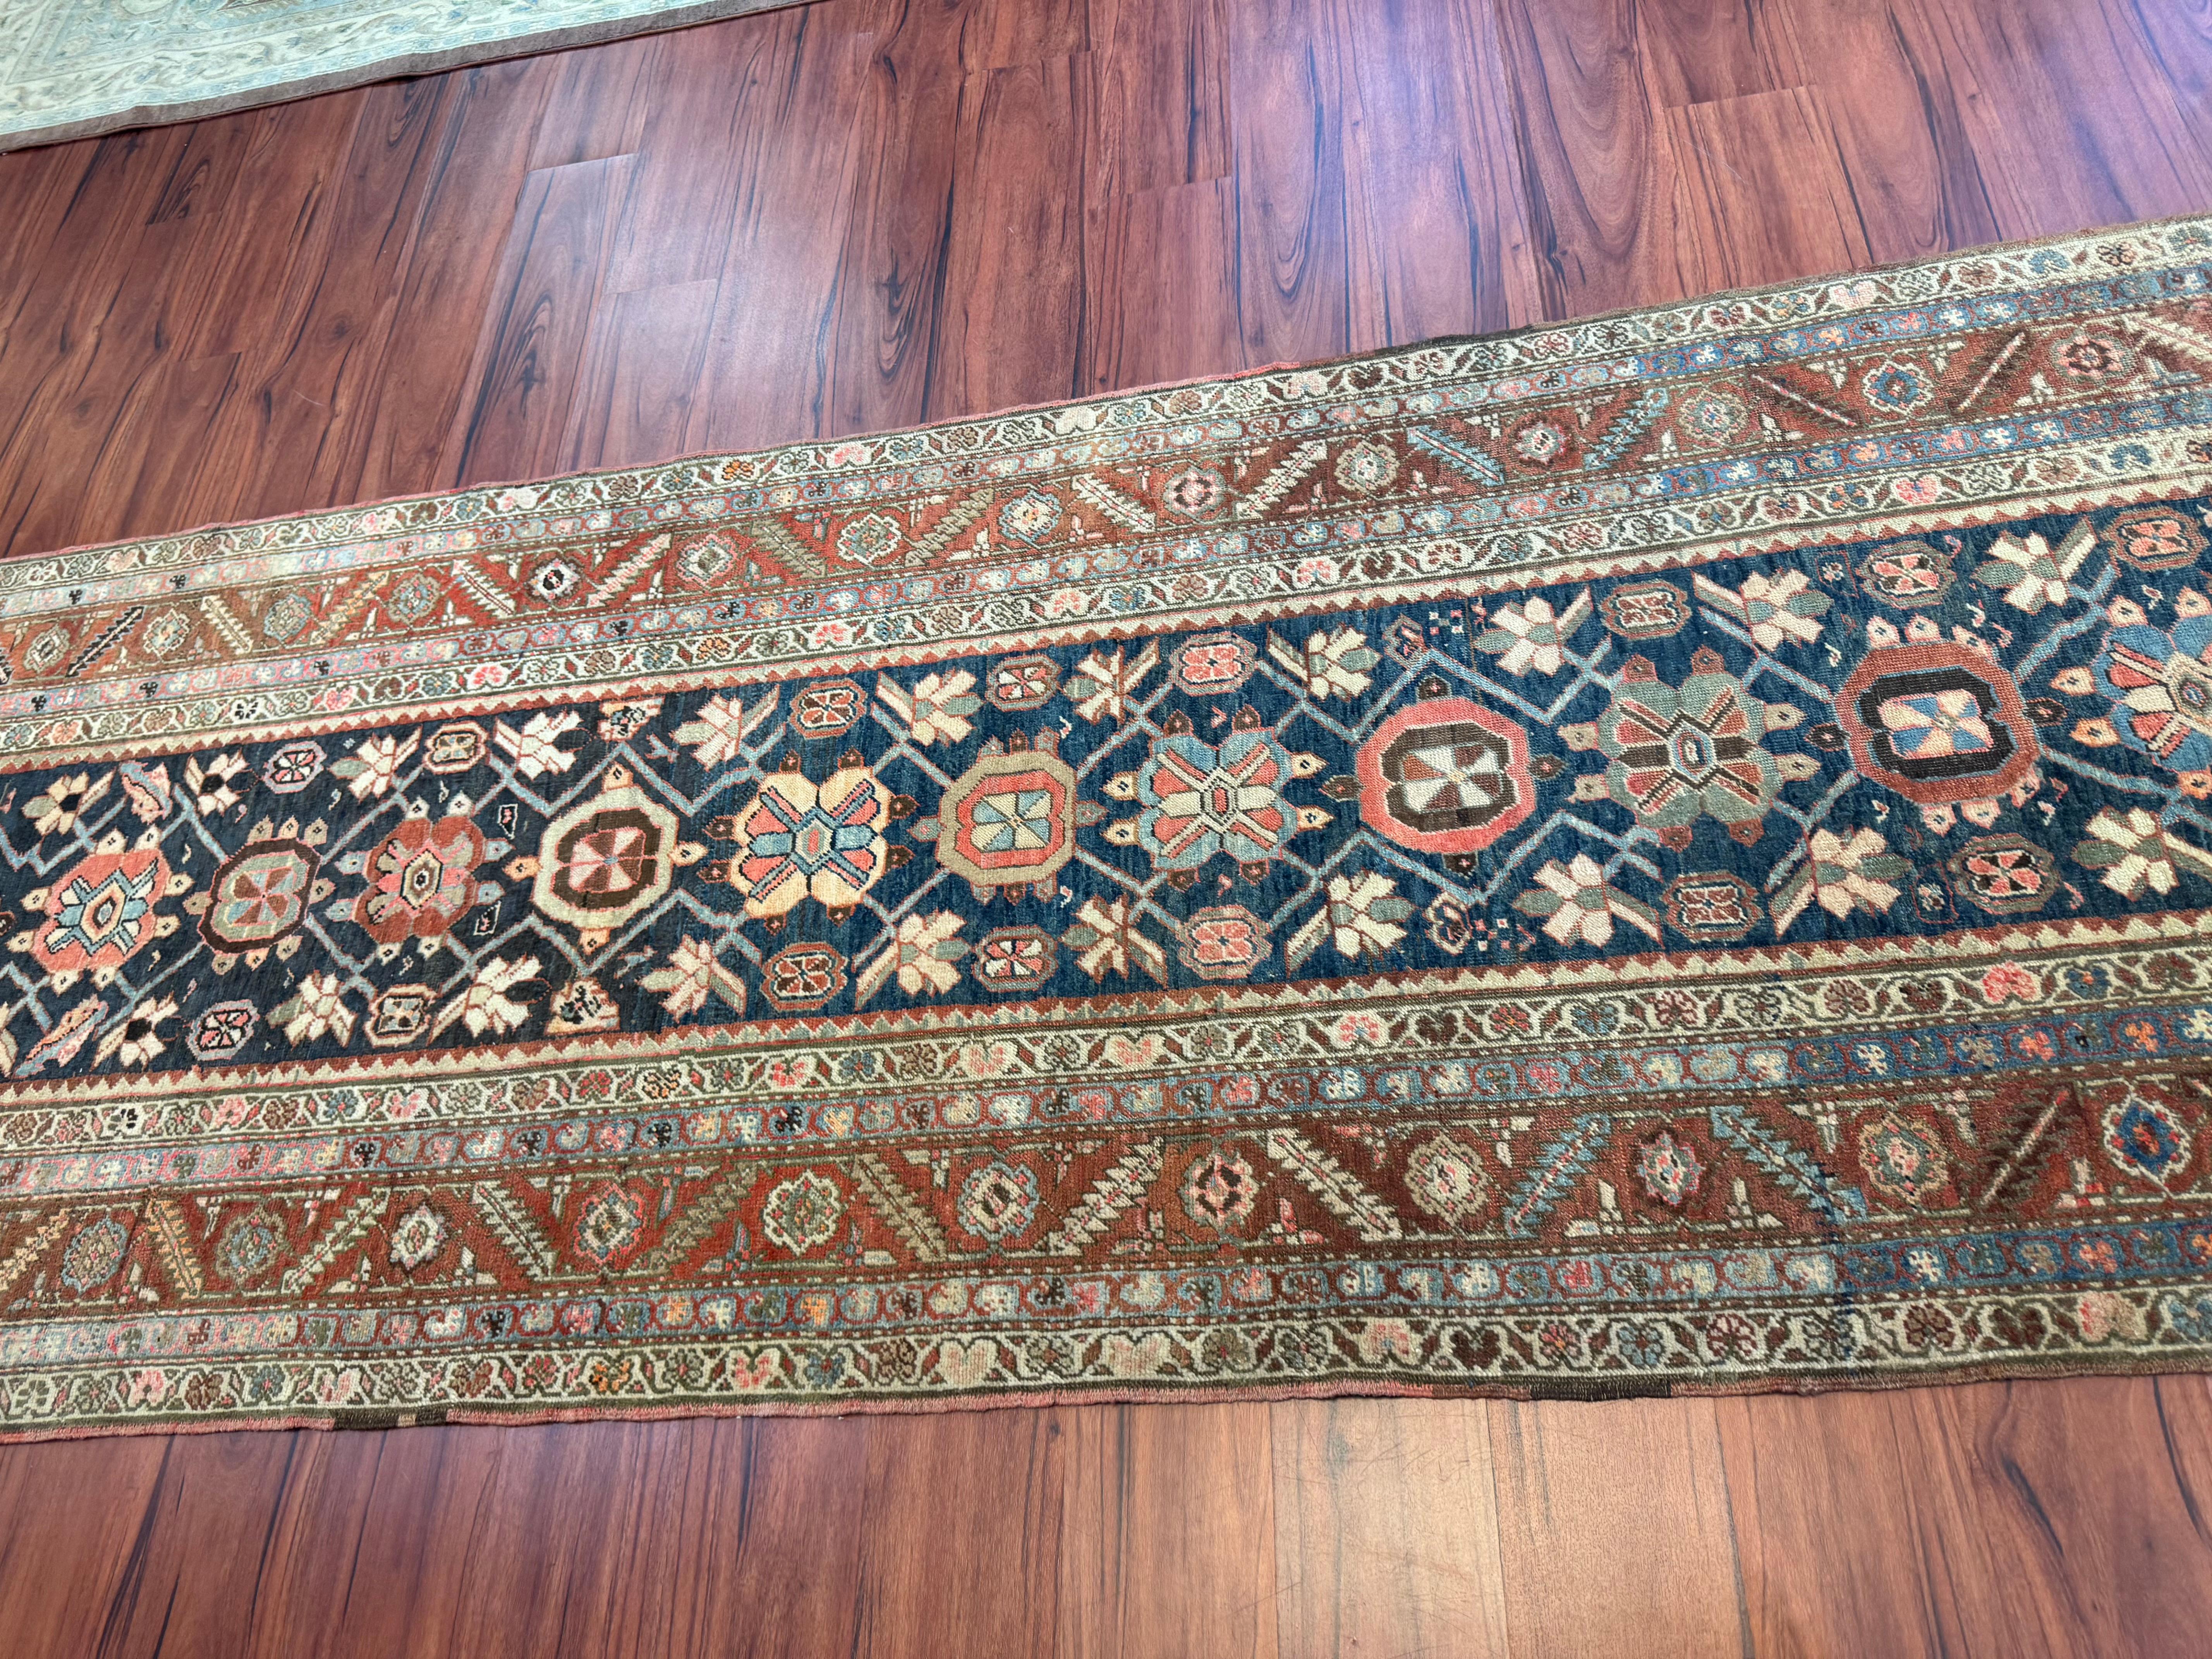 A stunning Antique Heriz runner rug that originated from Iran in the 1920s. This Rug is in excellent condition for its rich history and has only had minor repairs consistence with its age. 